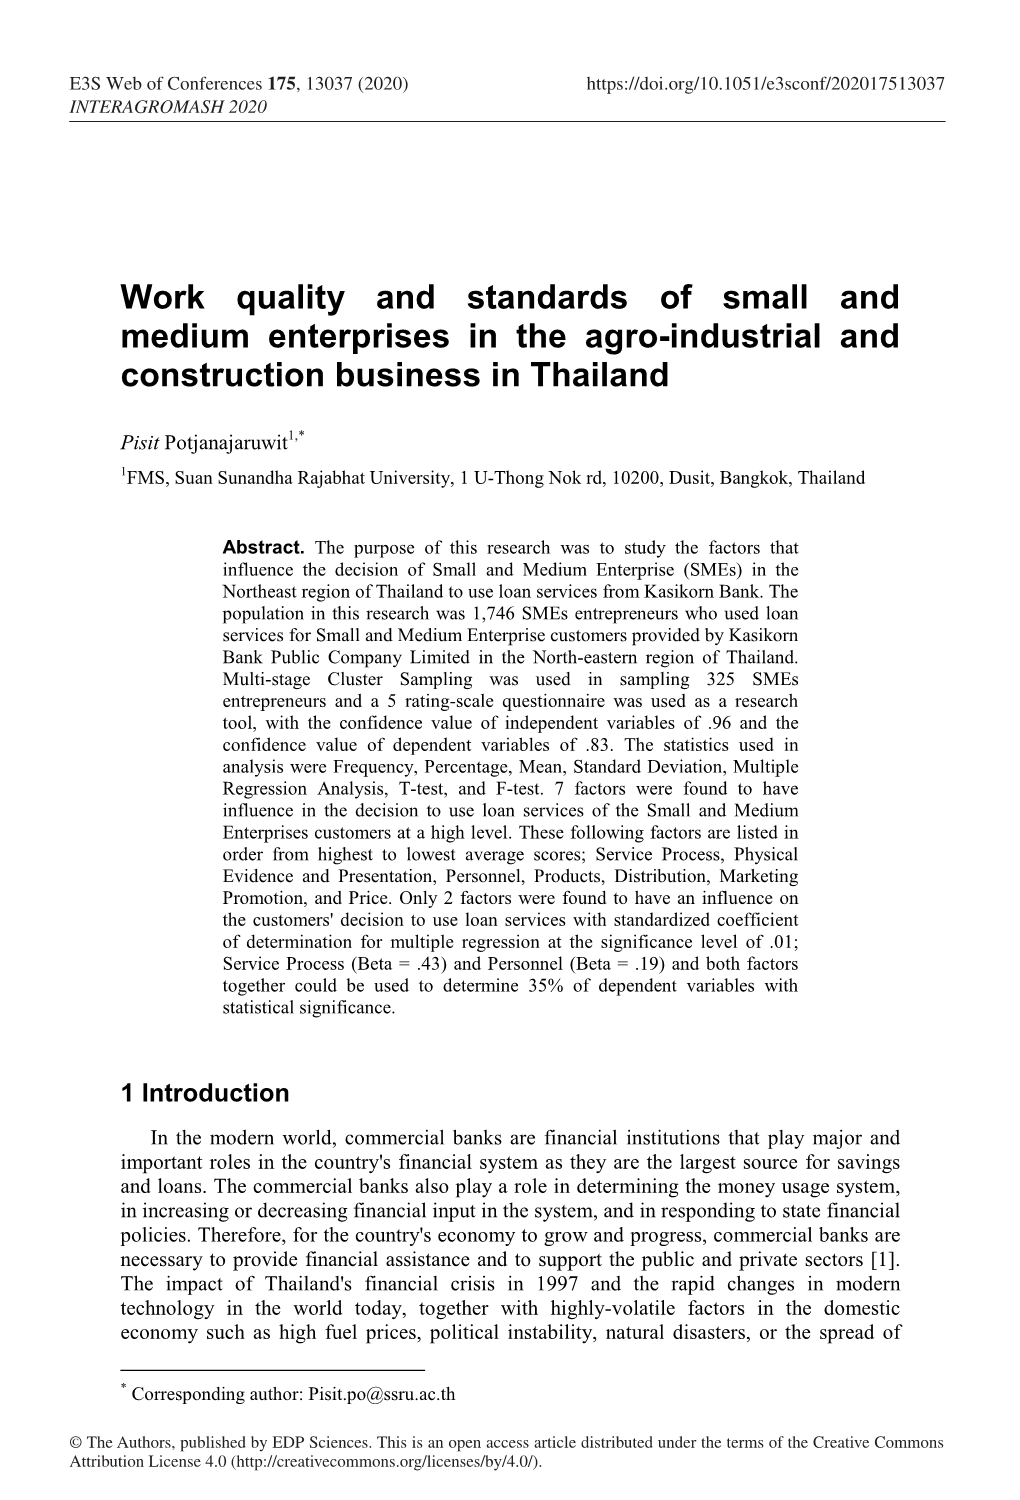 Work Quality and Standards of Small and Medium Enterprises in the Agro-Industrial and Construction Business in Thailand